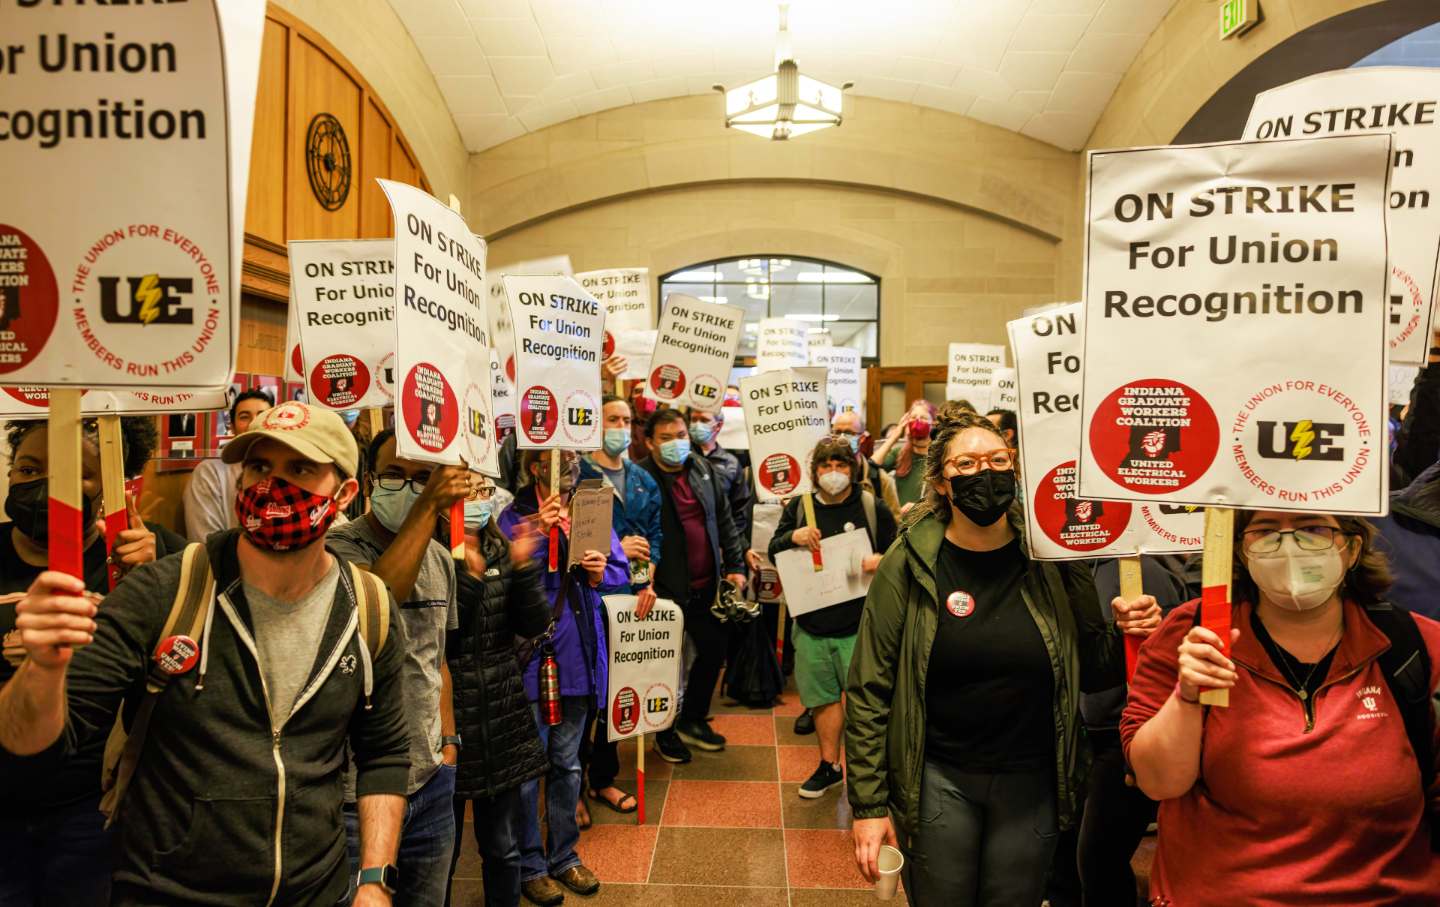 Graduate Workers at Indiana University Are on Strike and Fighting for Recognition